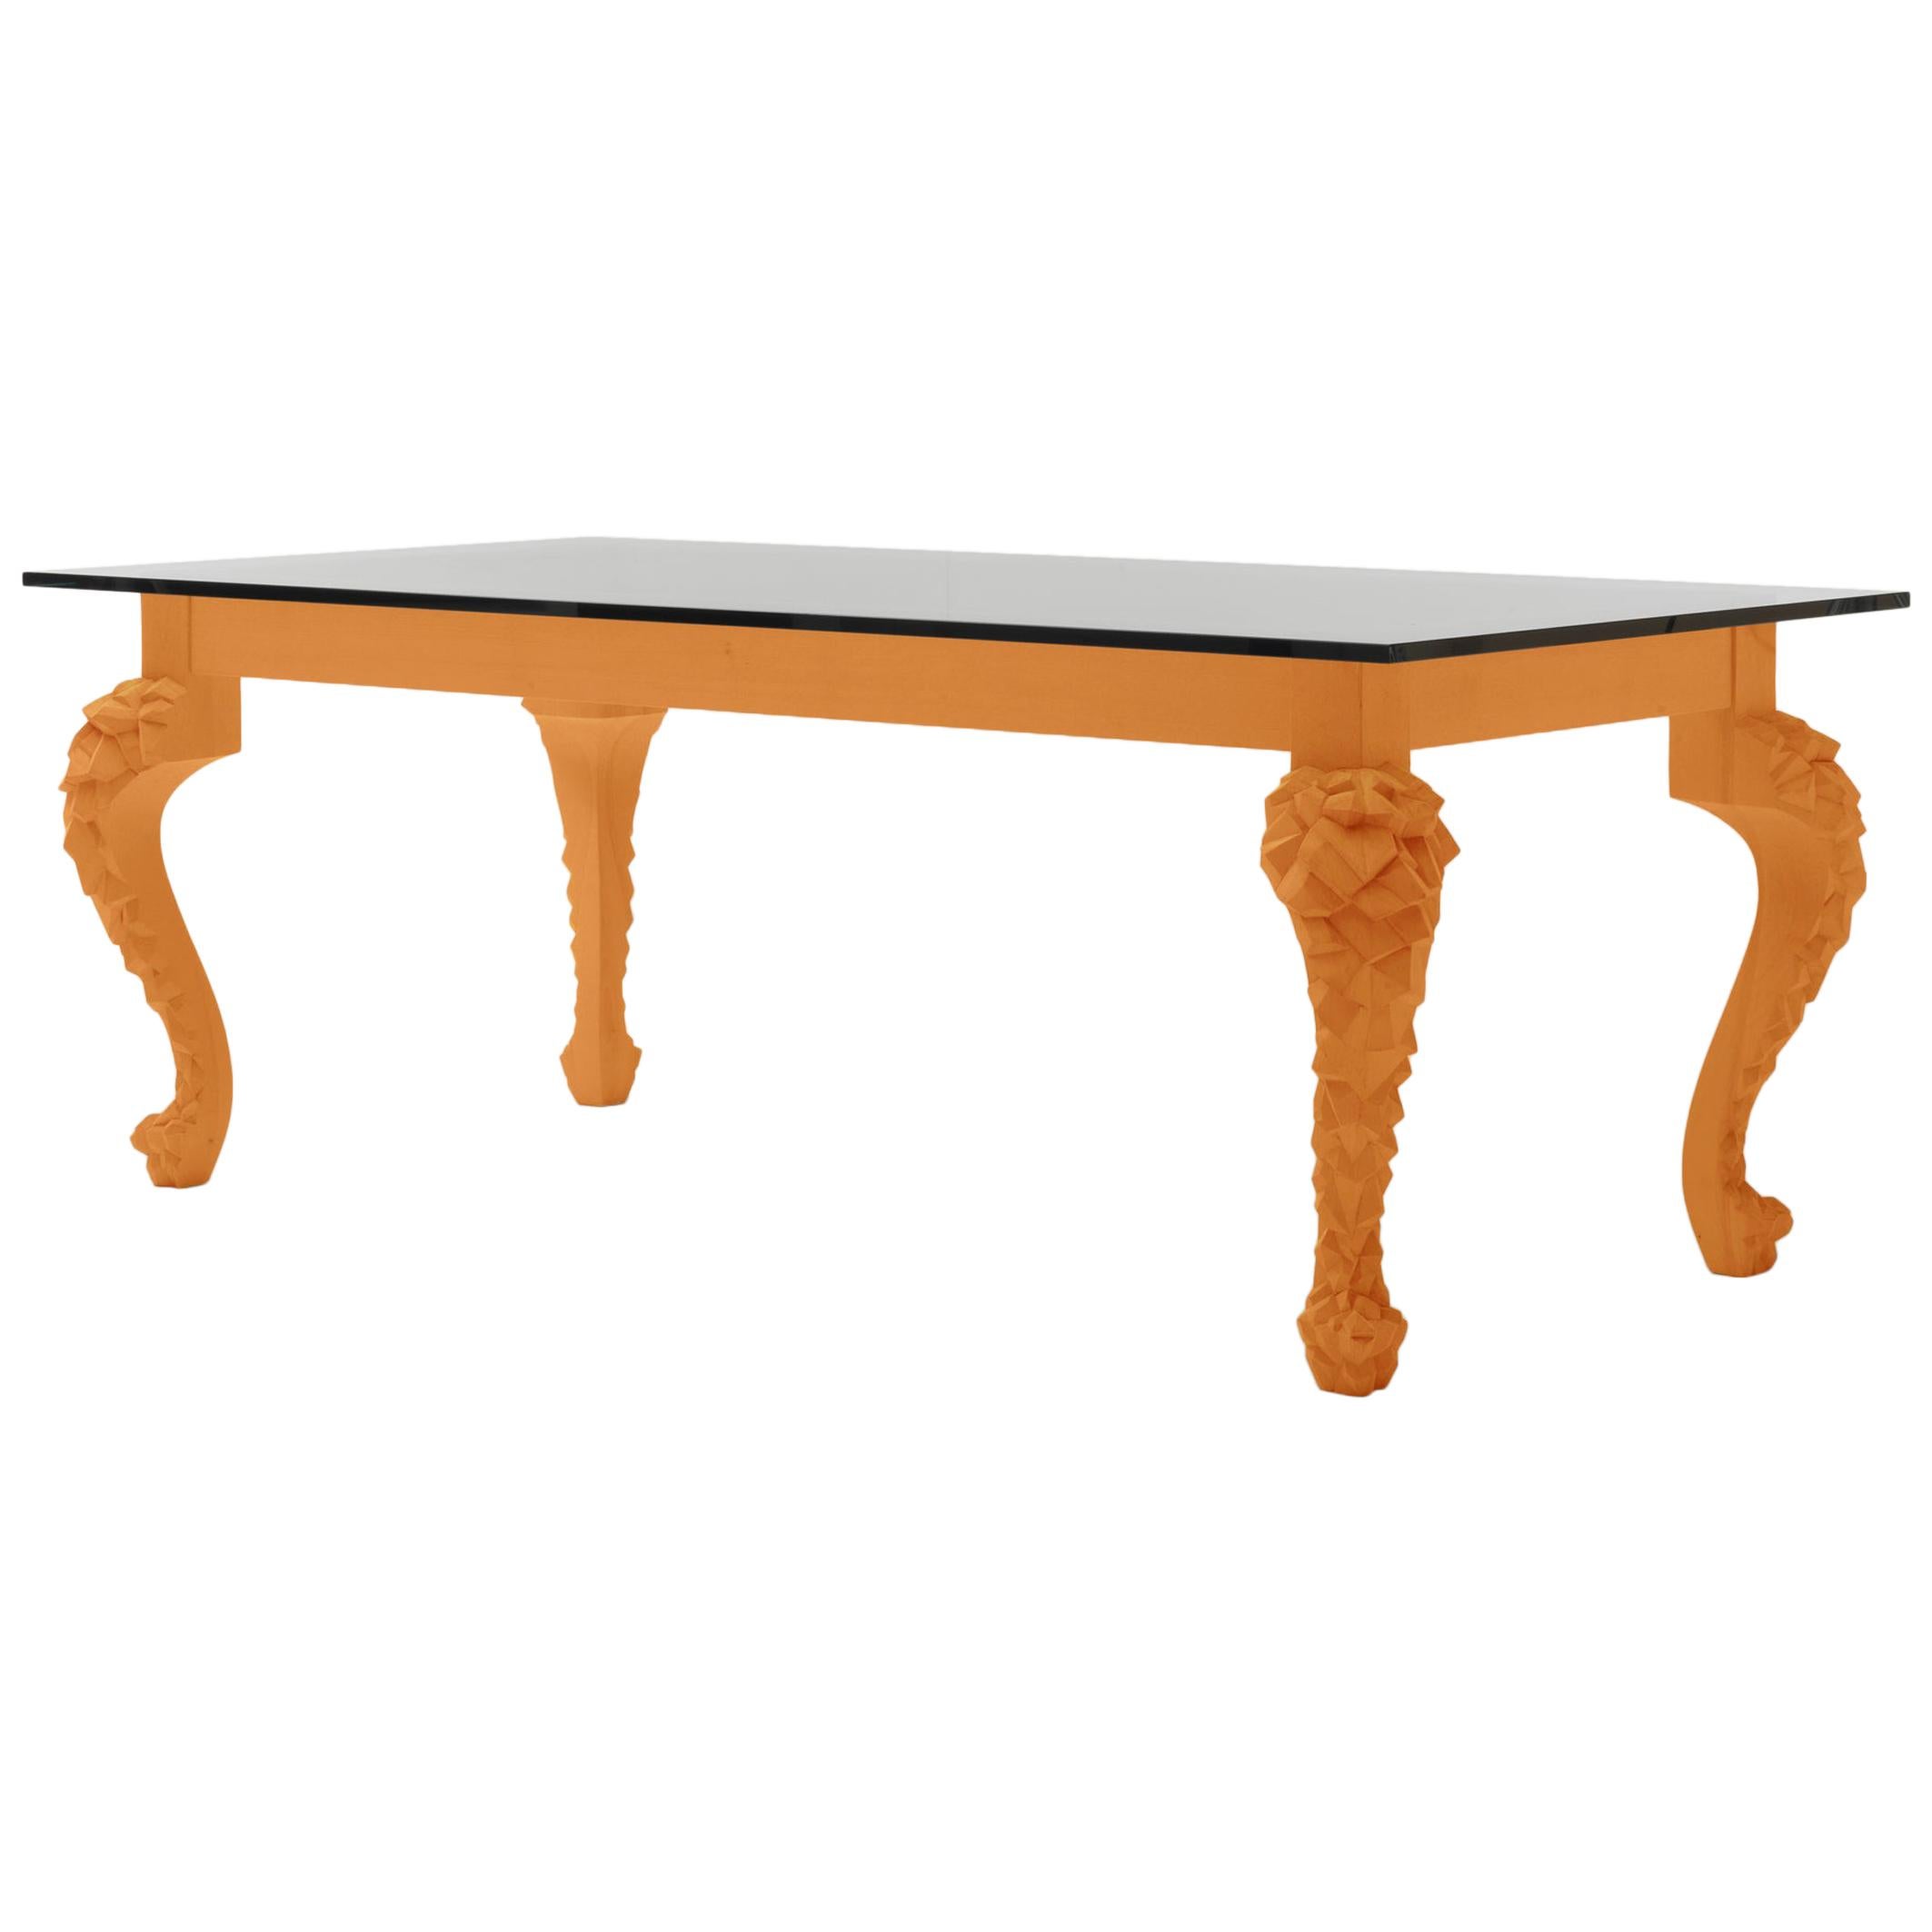 CRUSTY Orange Dining Table with Carved Legs and Glass Top by Nigel Coates For Sale